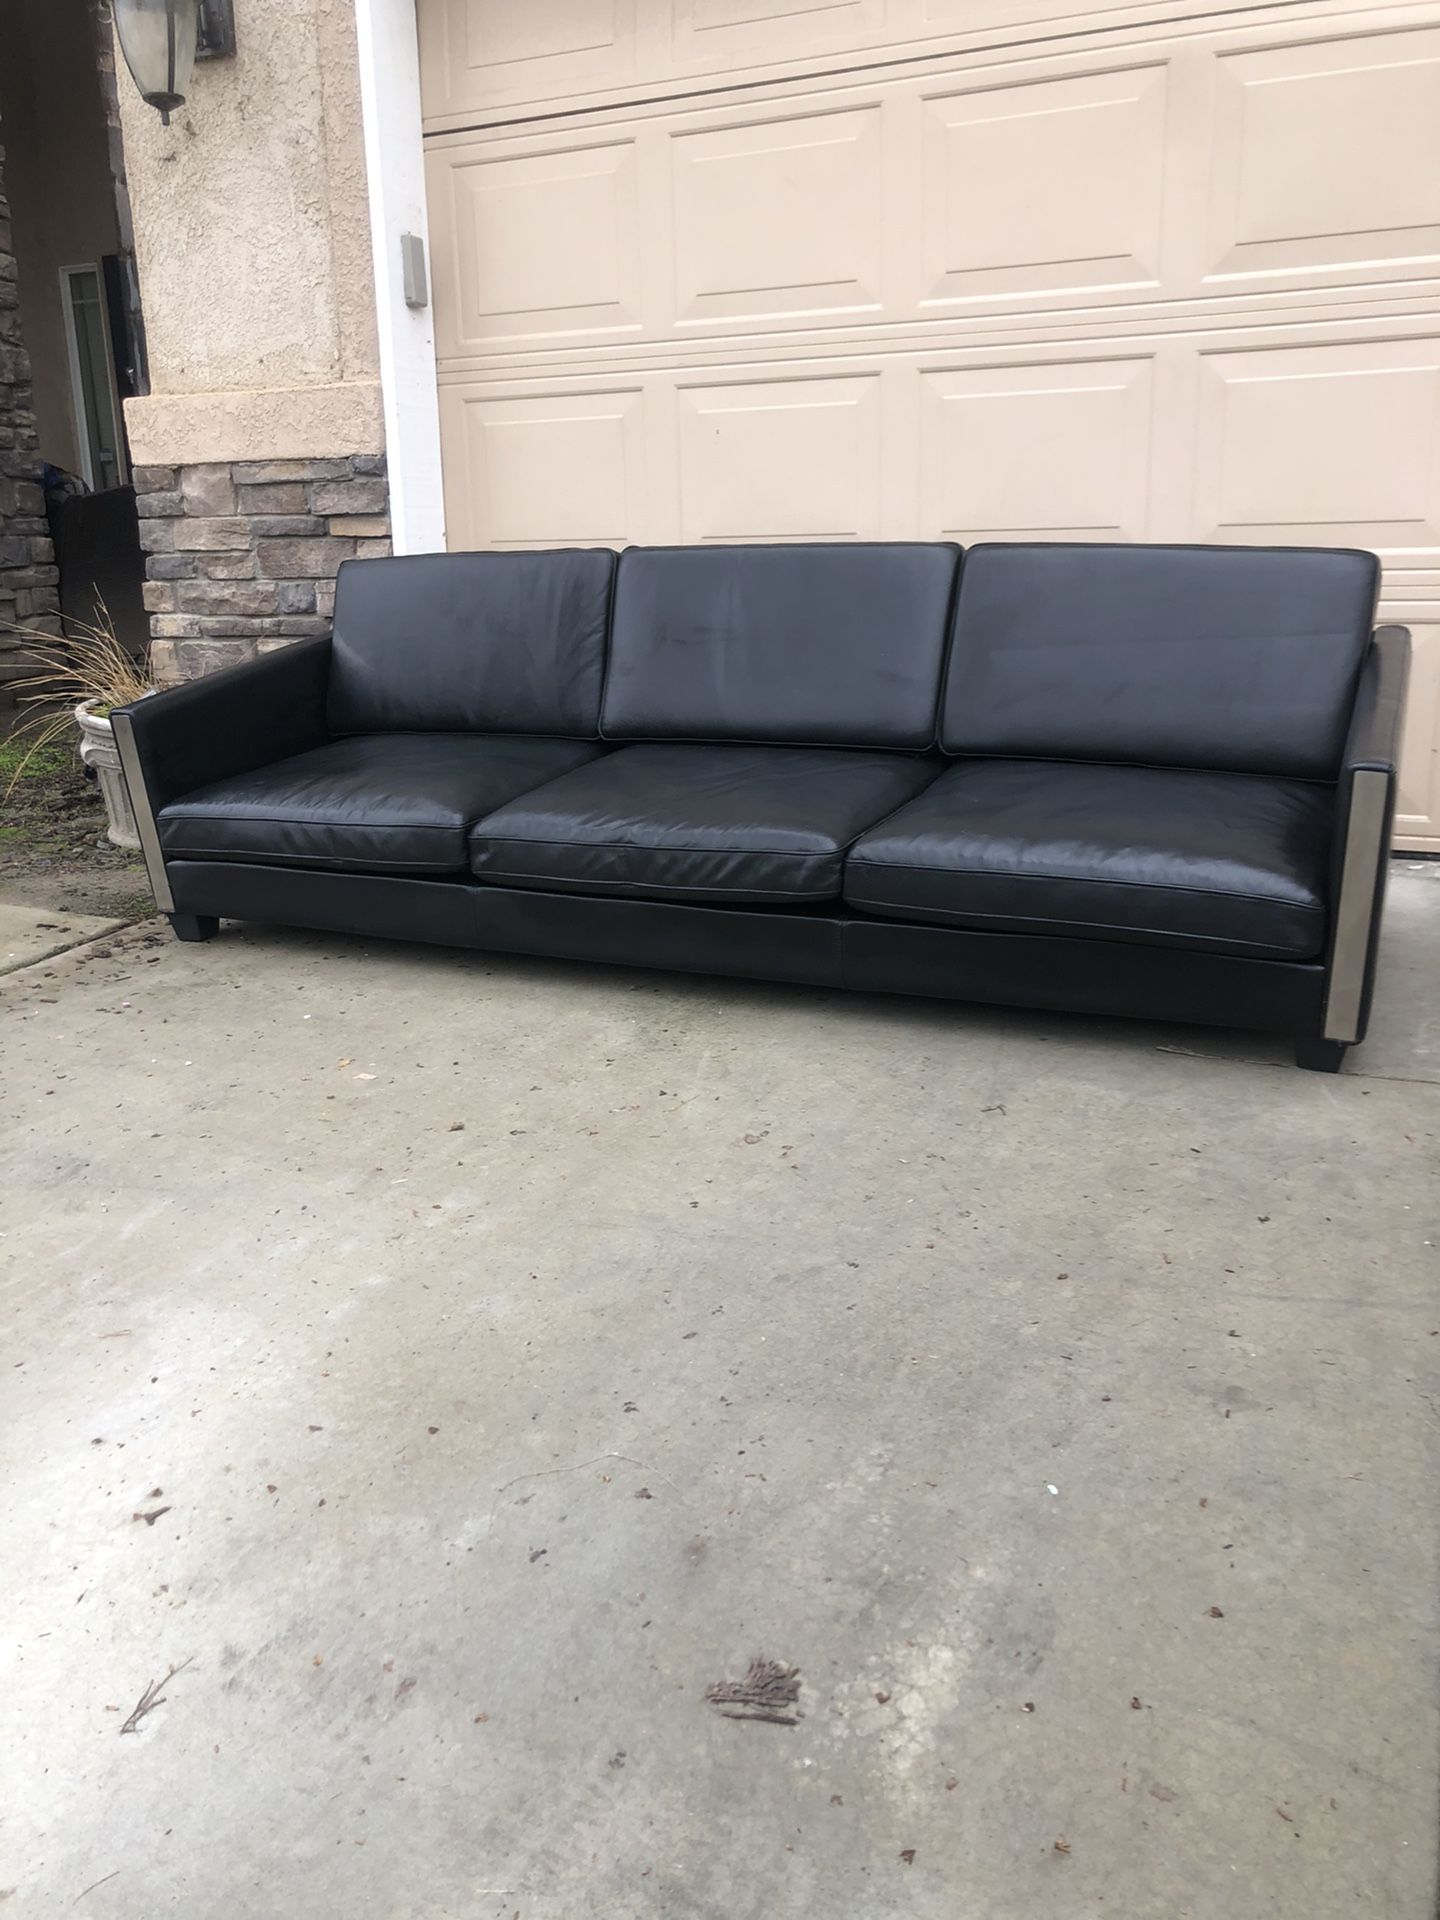 Beautiful black leather sofa. Less than 4yrs old. Please look at all pictures. Retails for $2200